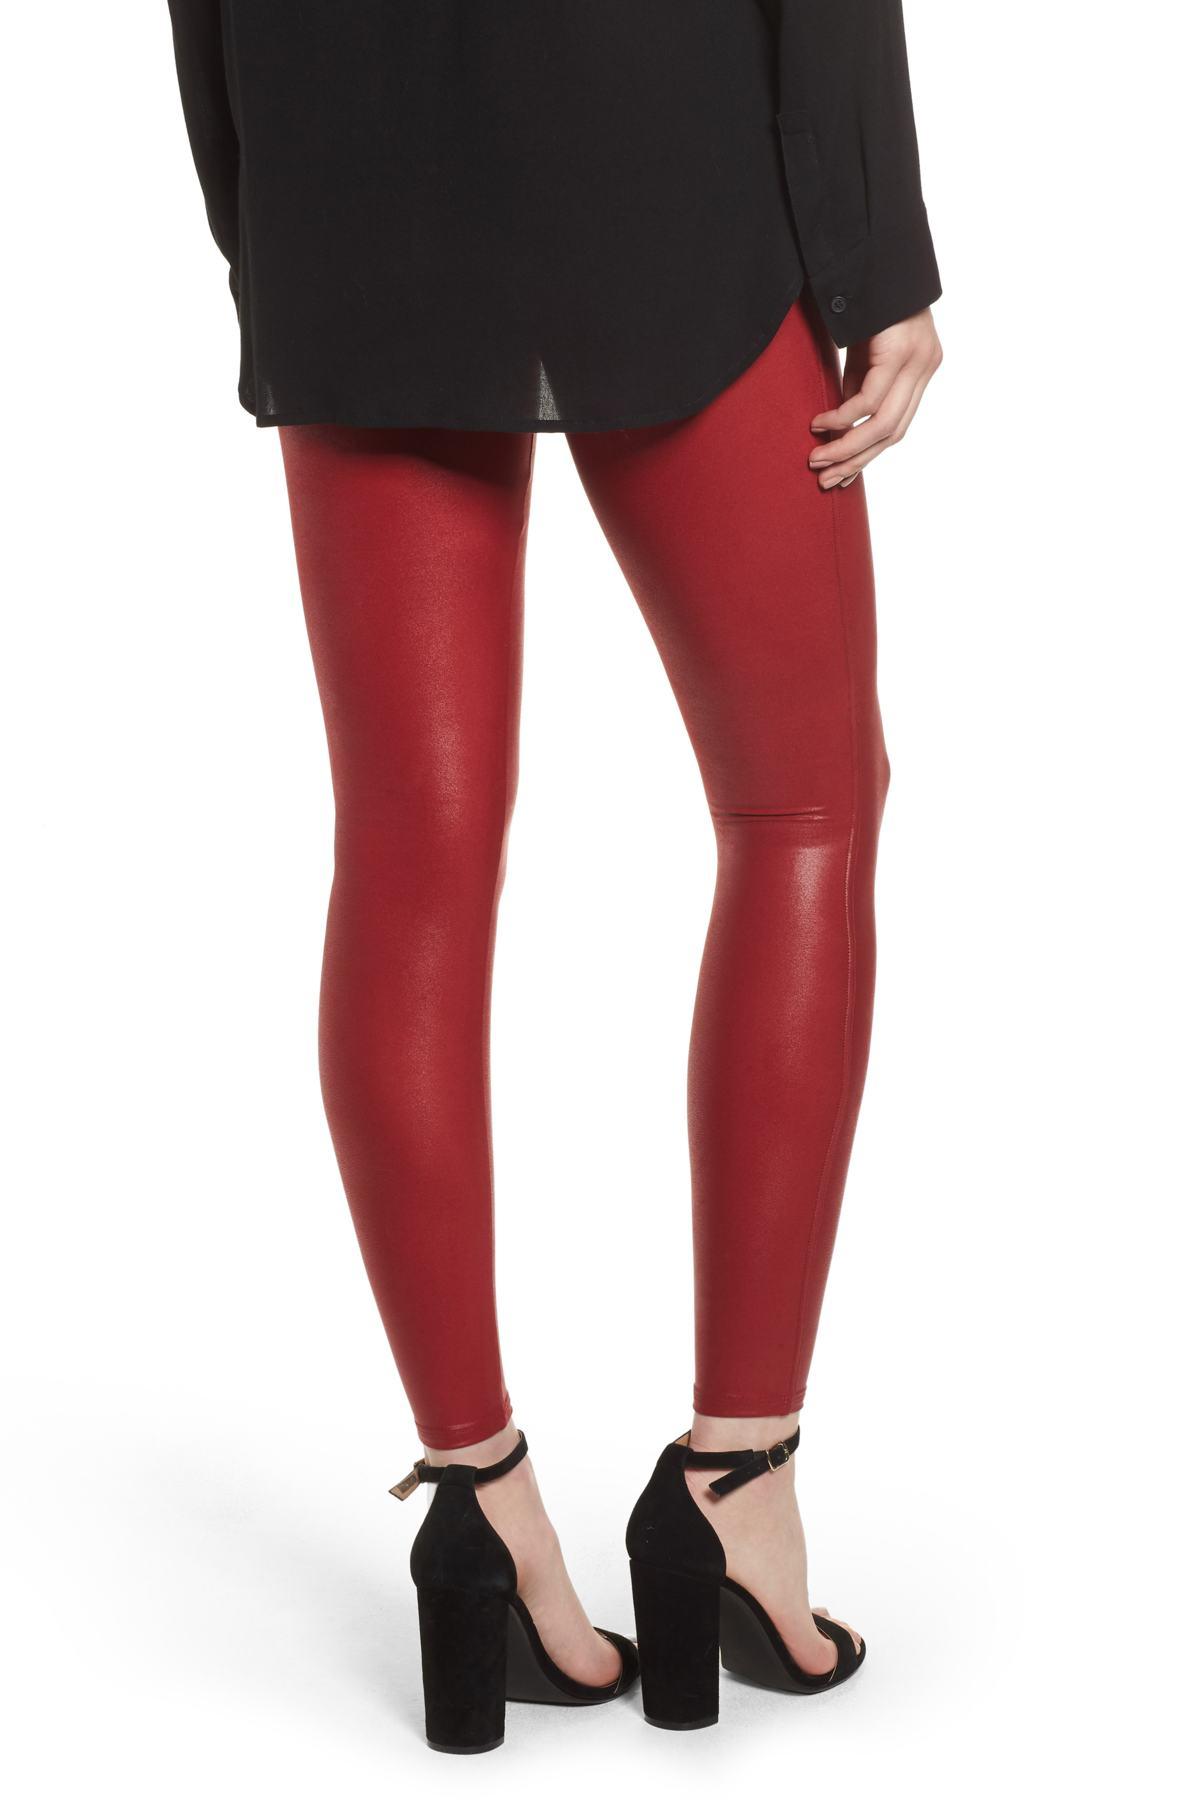 Spanx (r) Faux Leather Leggings in Crimson (Red) - Lyst